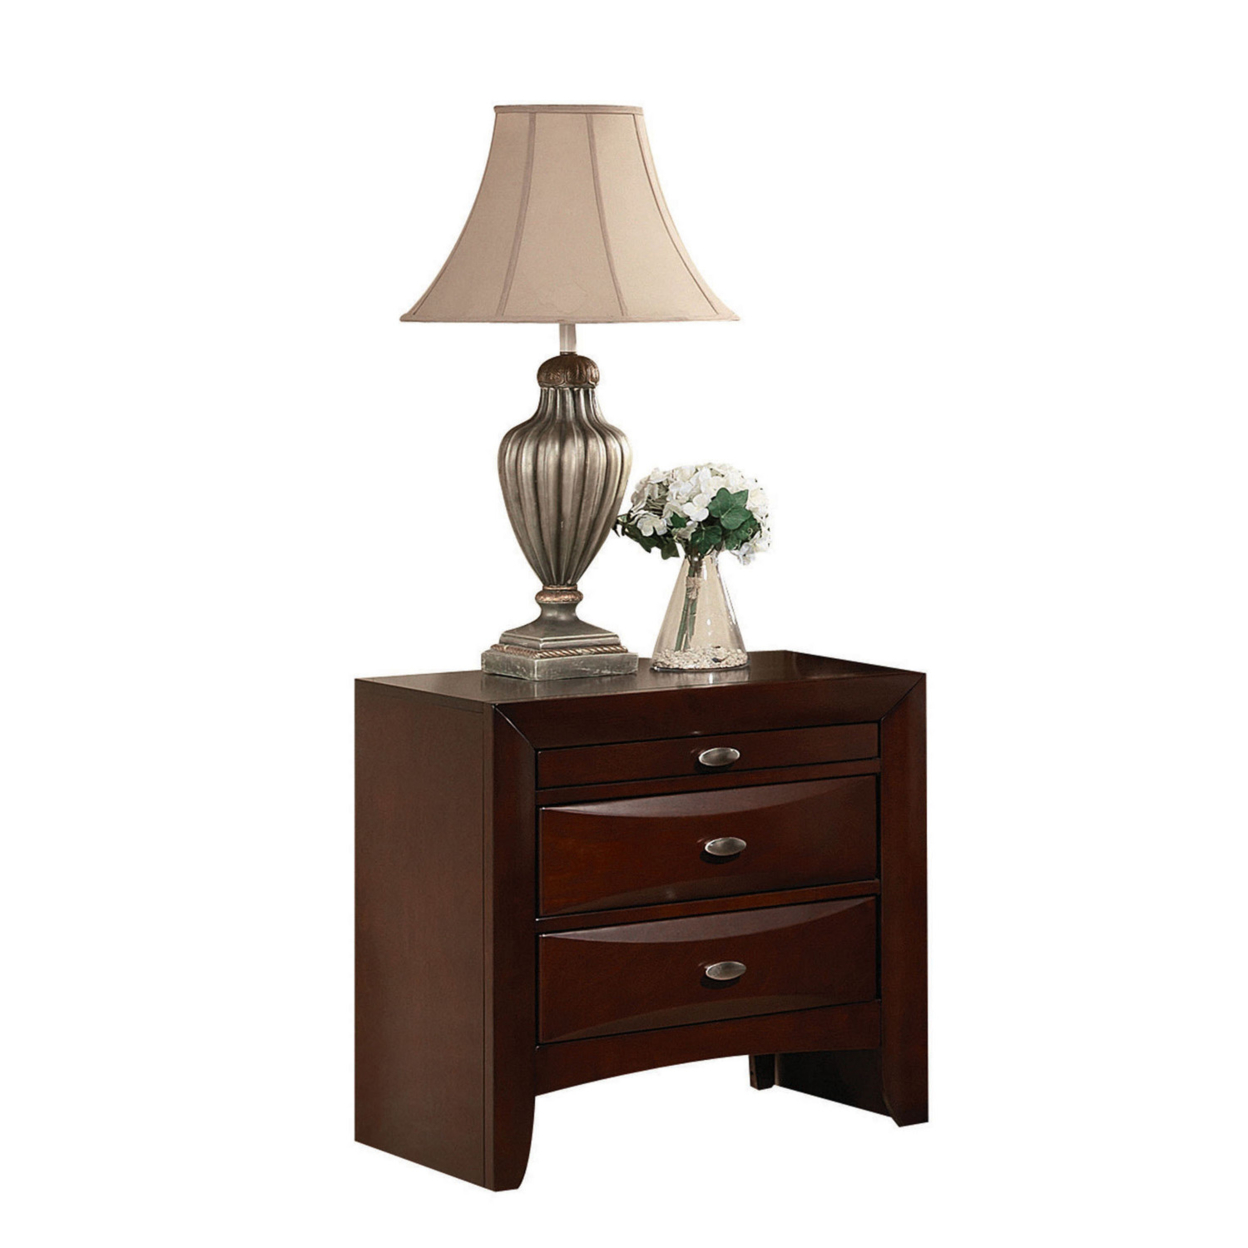 Contemporary Style Wooden Nightstand With Three Drawers And Metal Knobs, Brown- Saltoro Sherpi